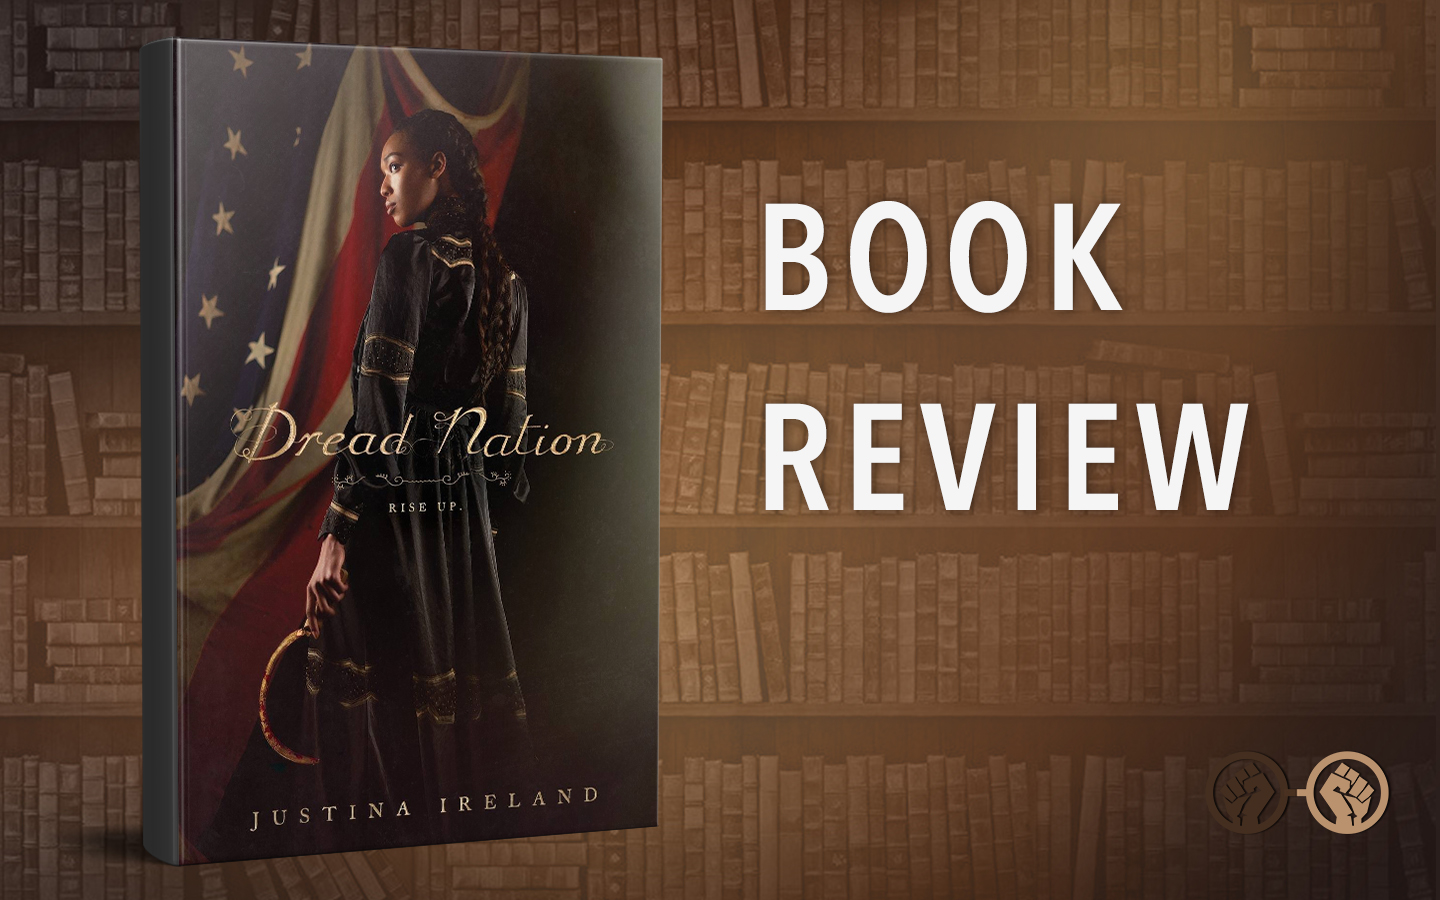 Book Review: ‘Dread Nation’ by Justina Ireland